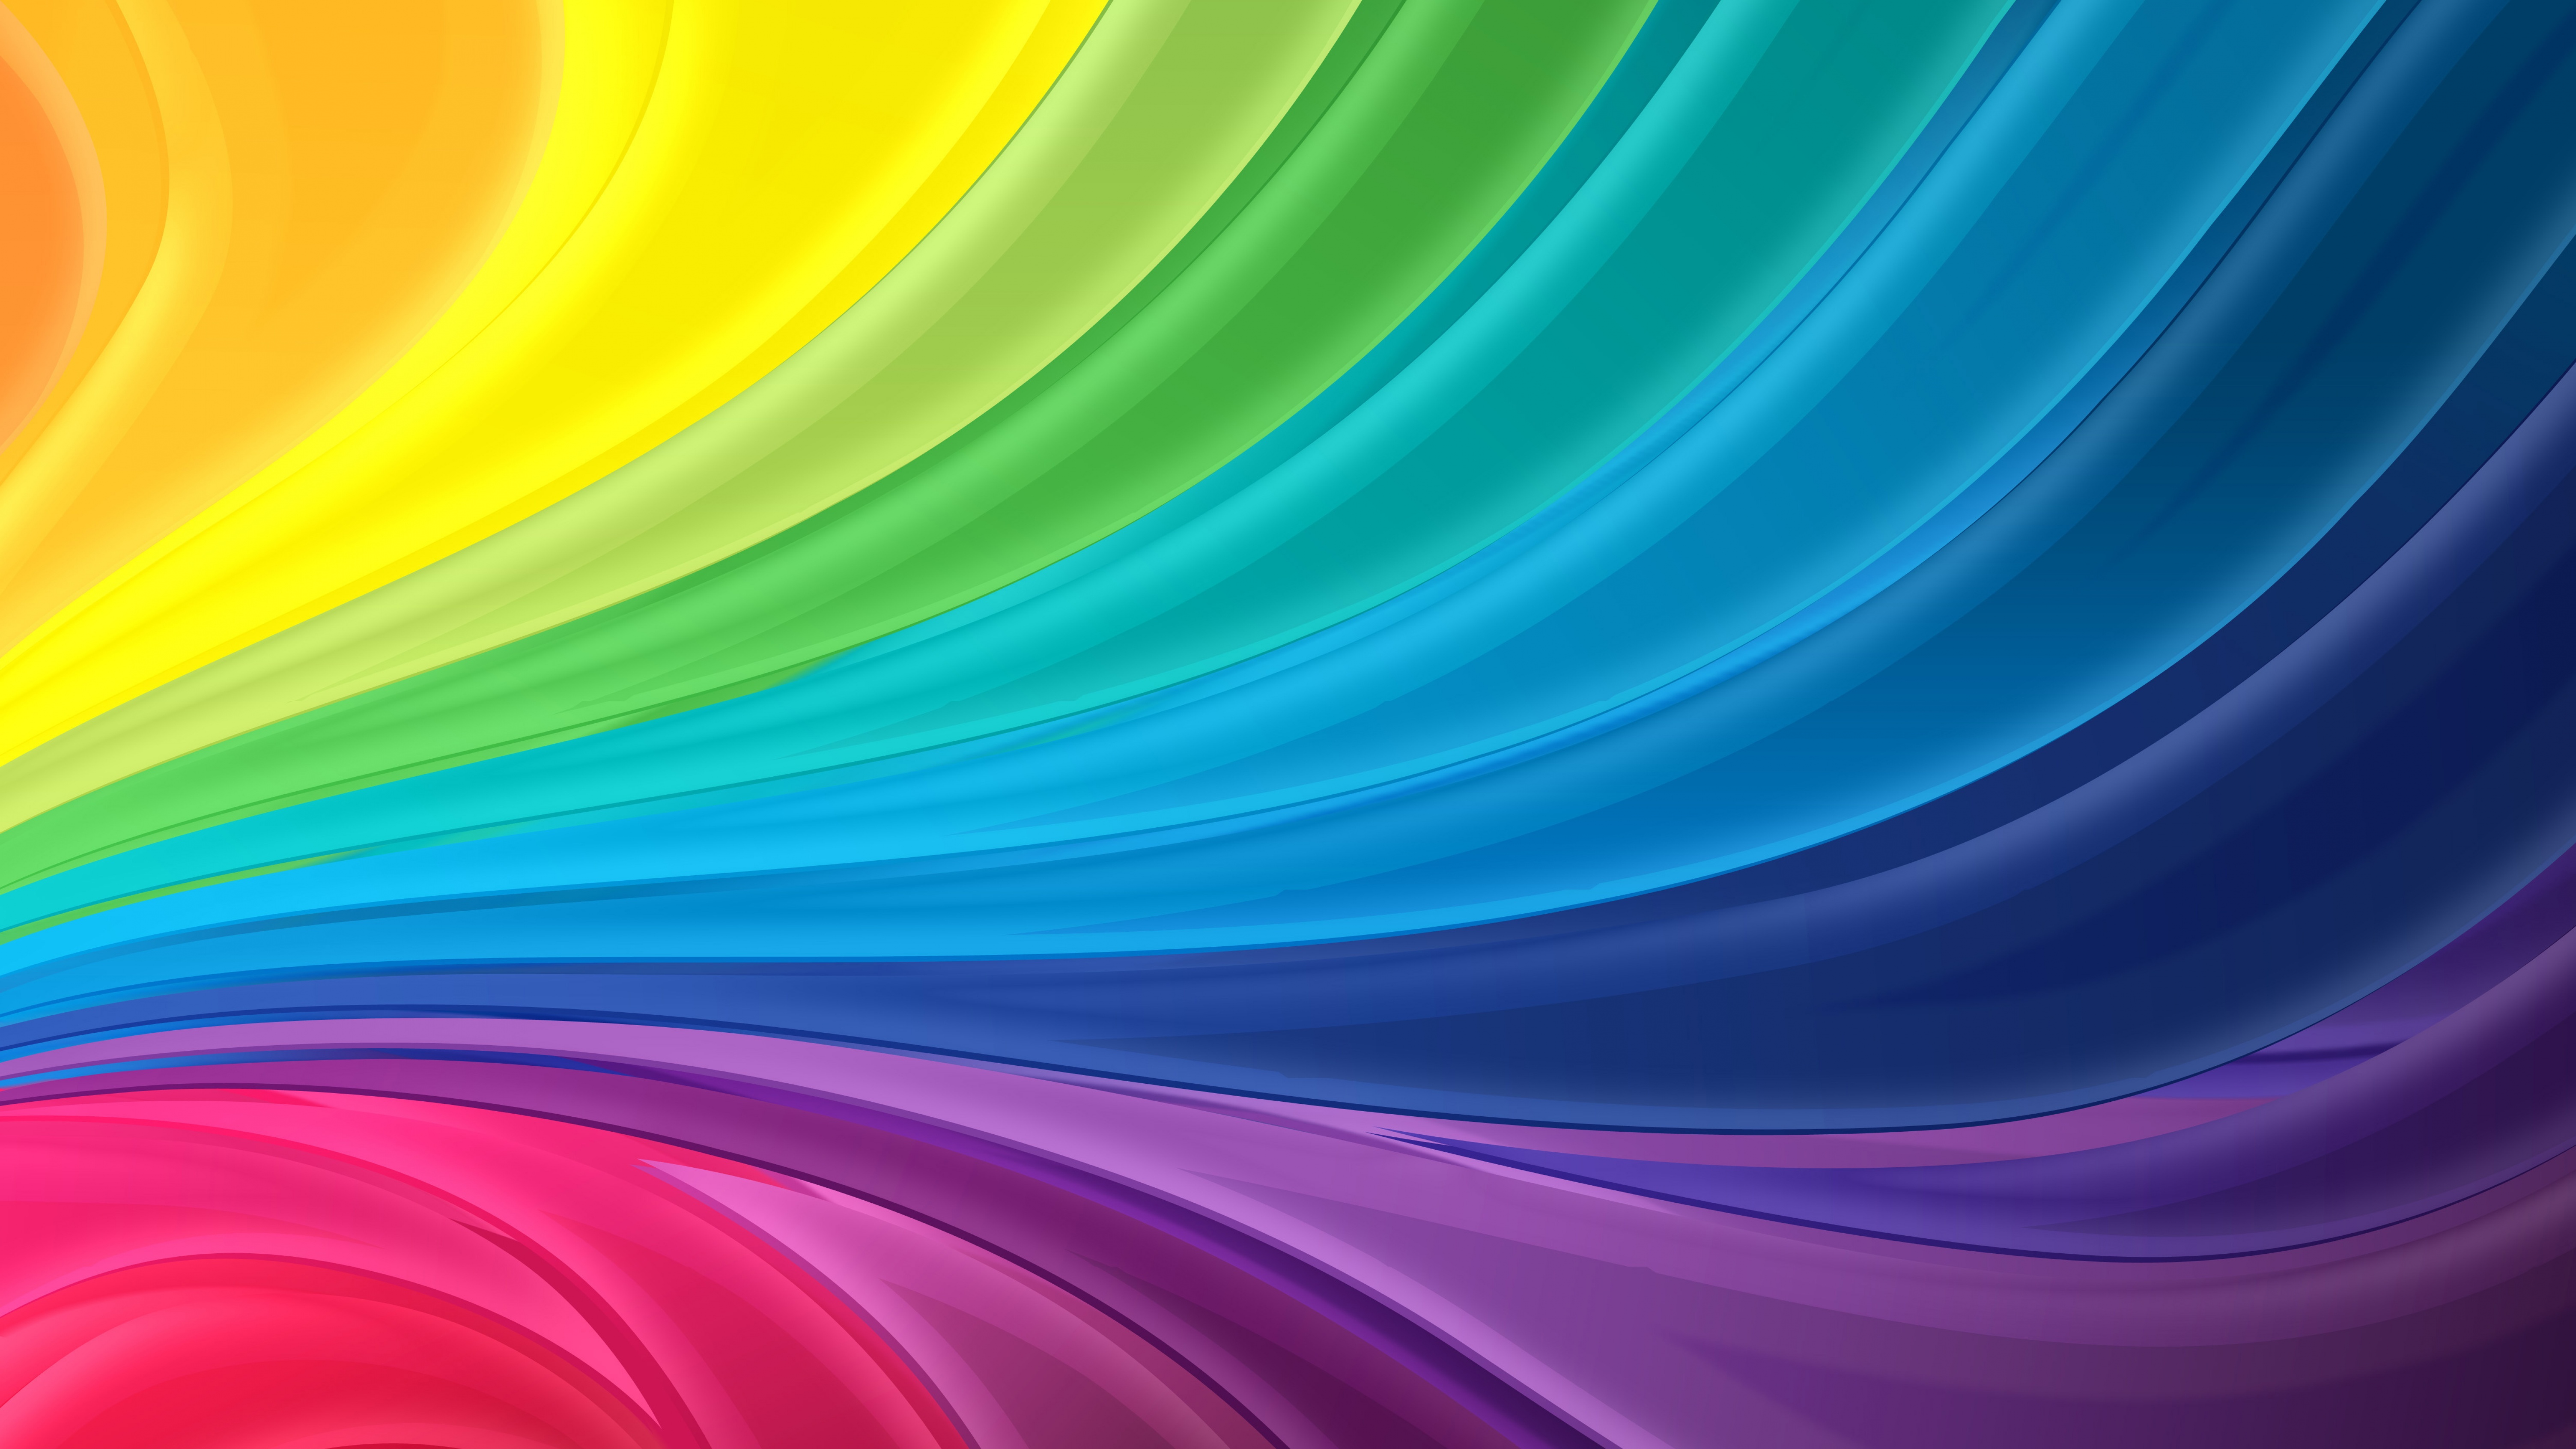 Rainbow Squiggles wallpaper by MarciDog_2 - Download on ZEDGE™ | 0e03